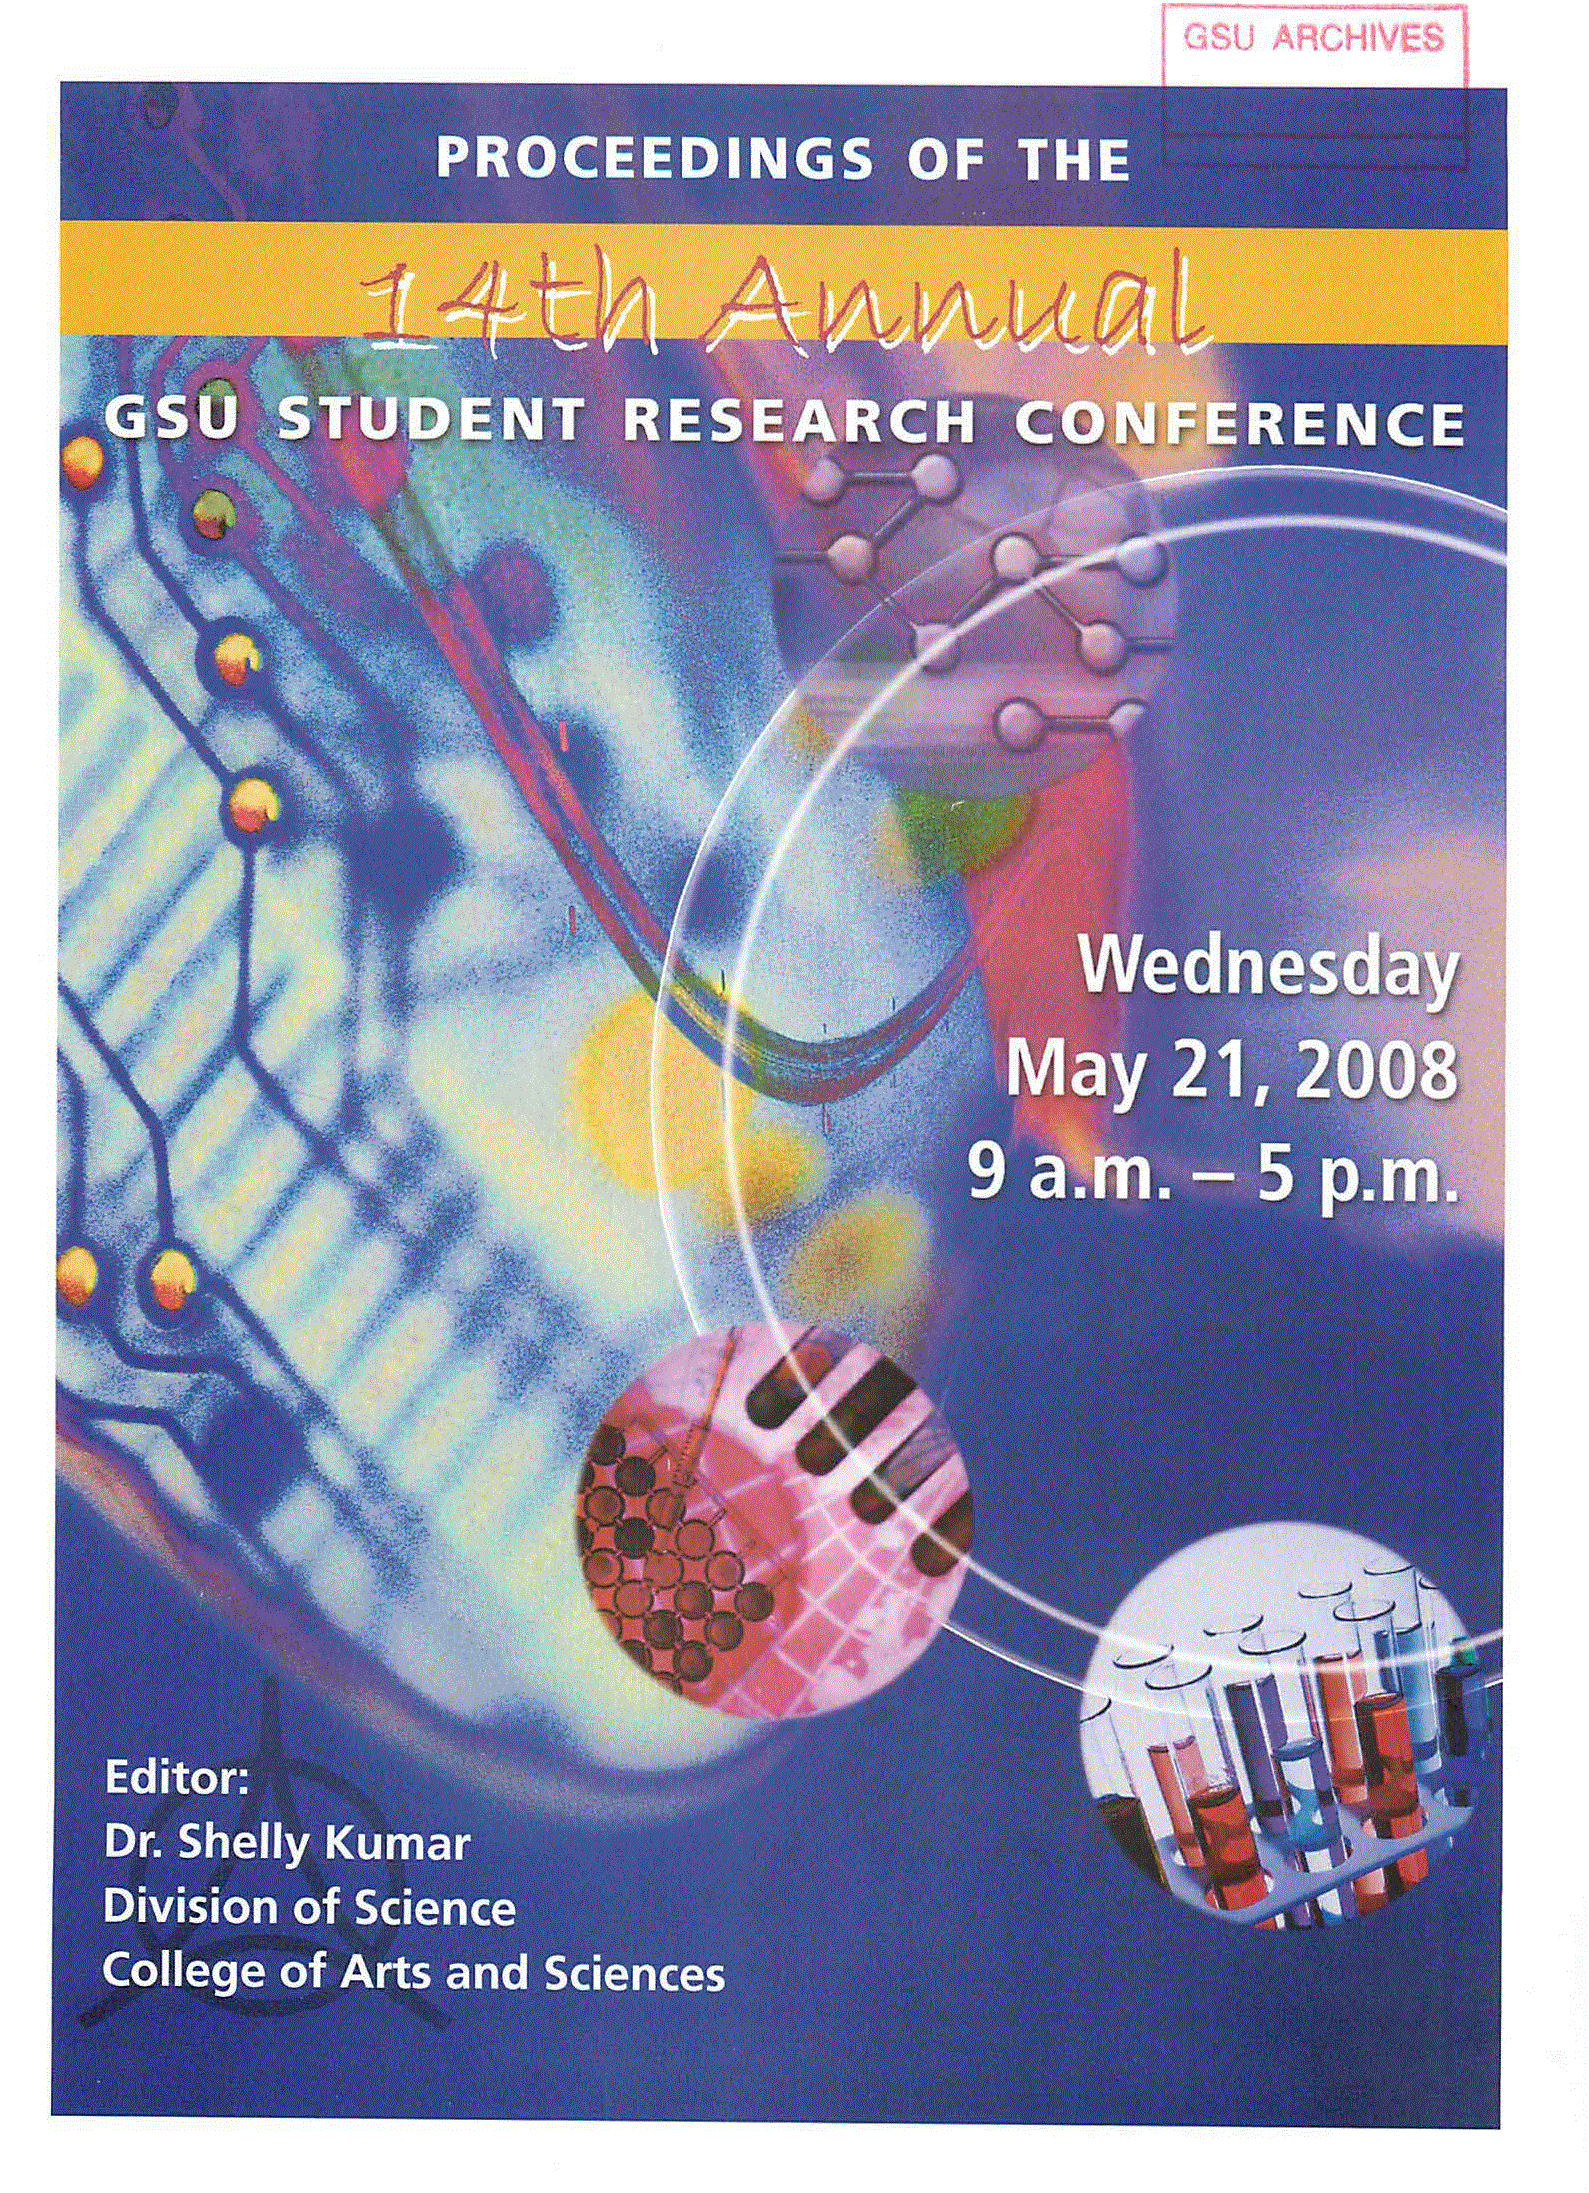 Student Research Conference Proceedings